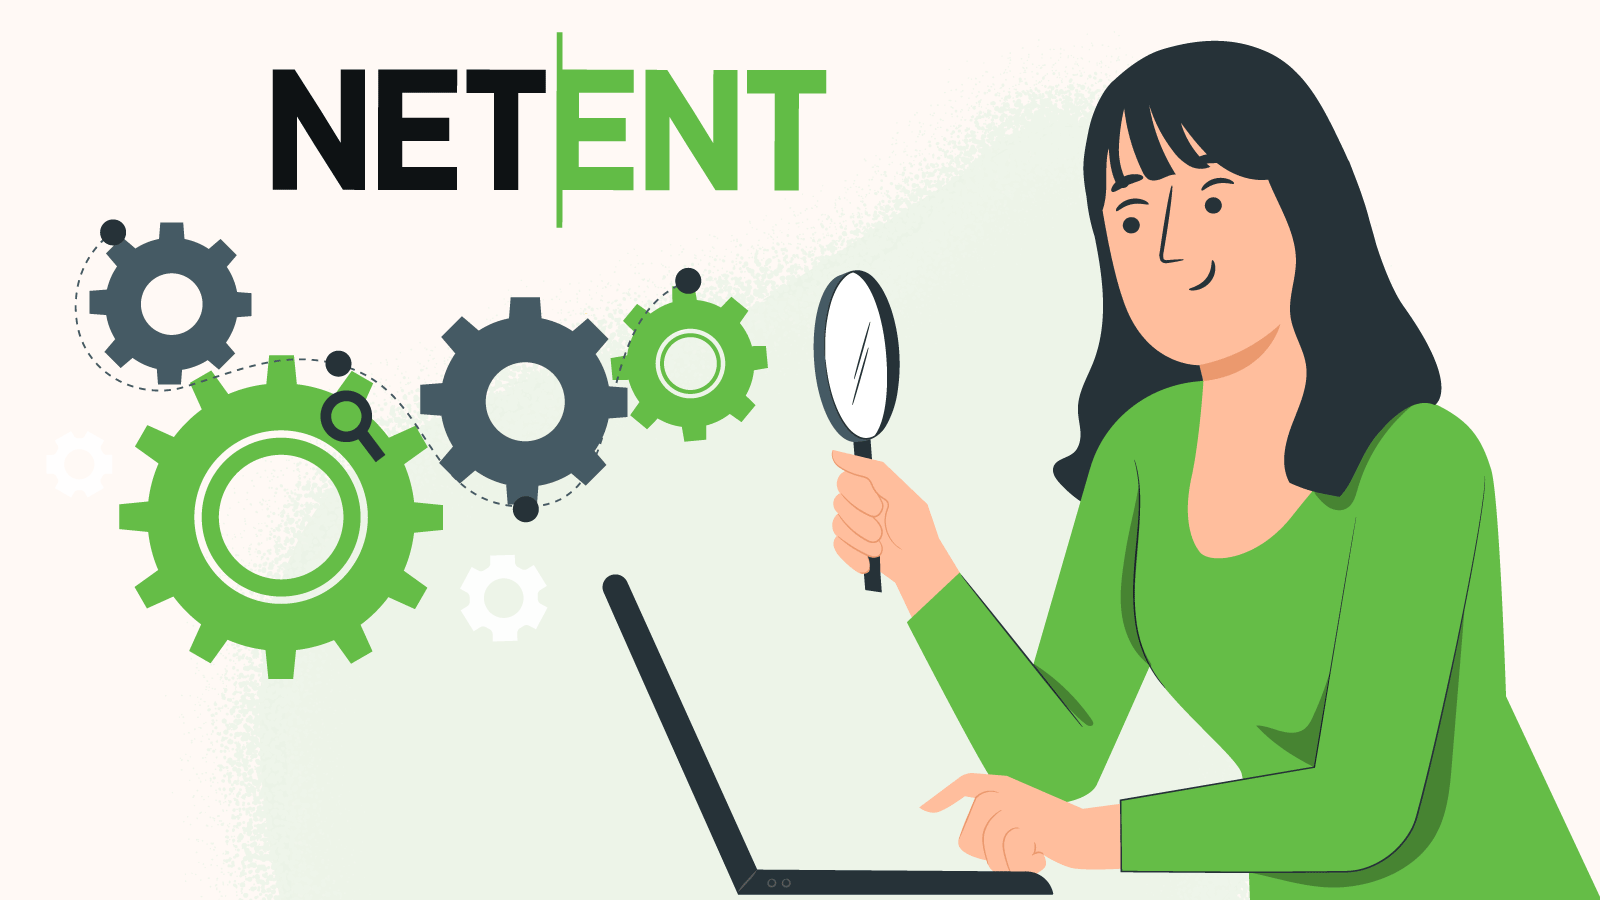 Our selection method for NetEnt bonuses